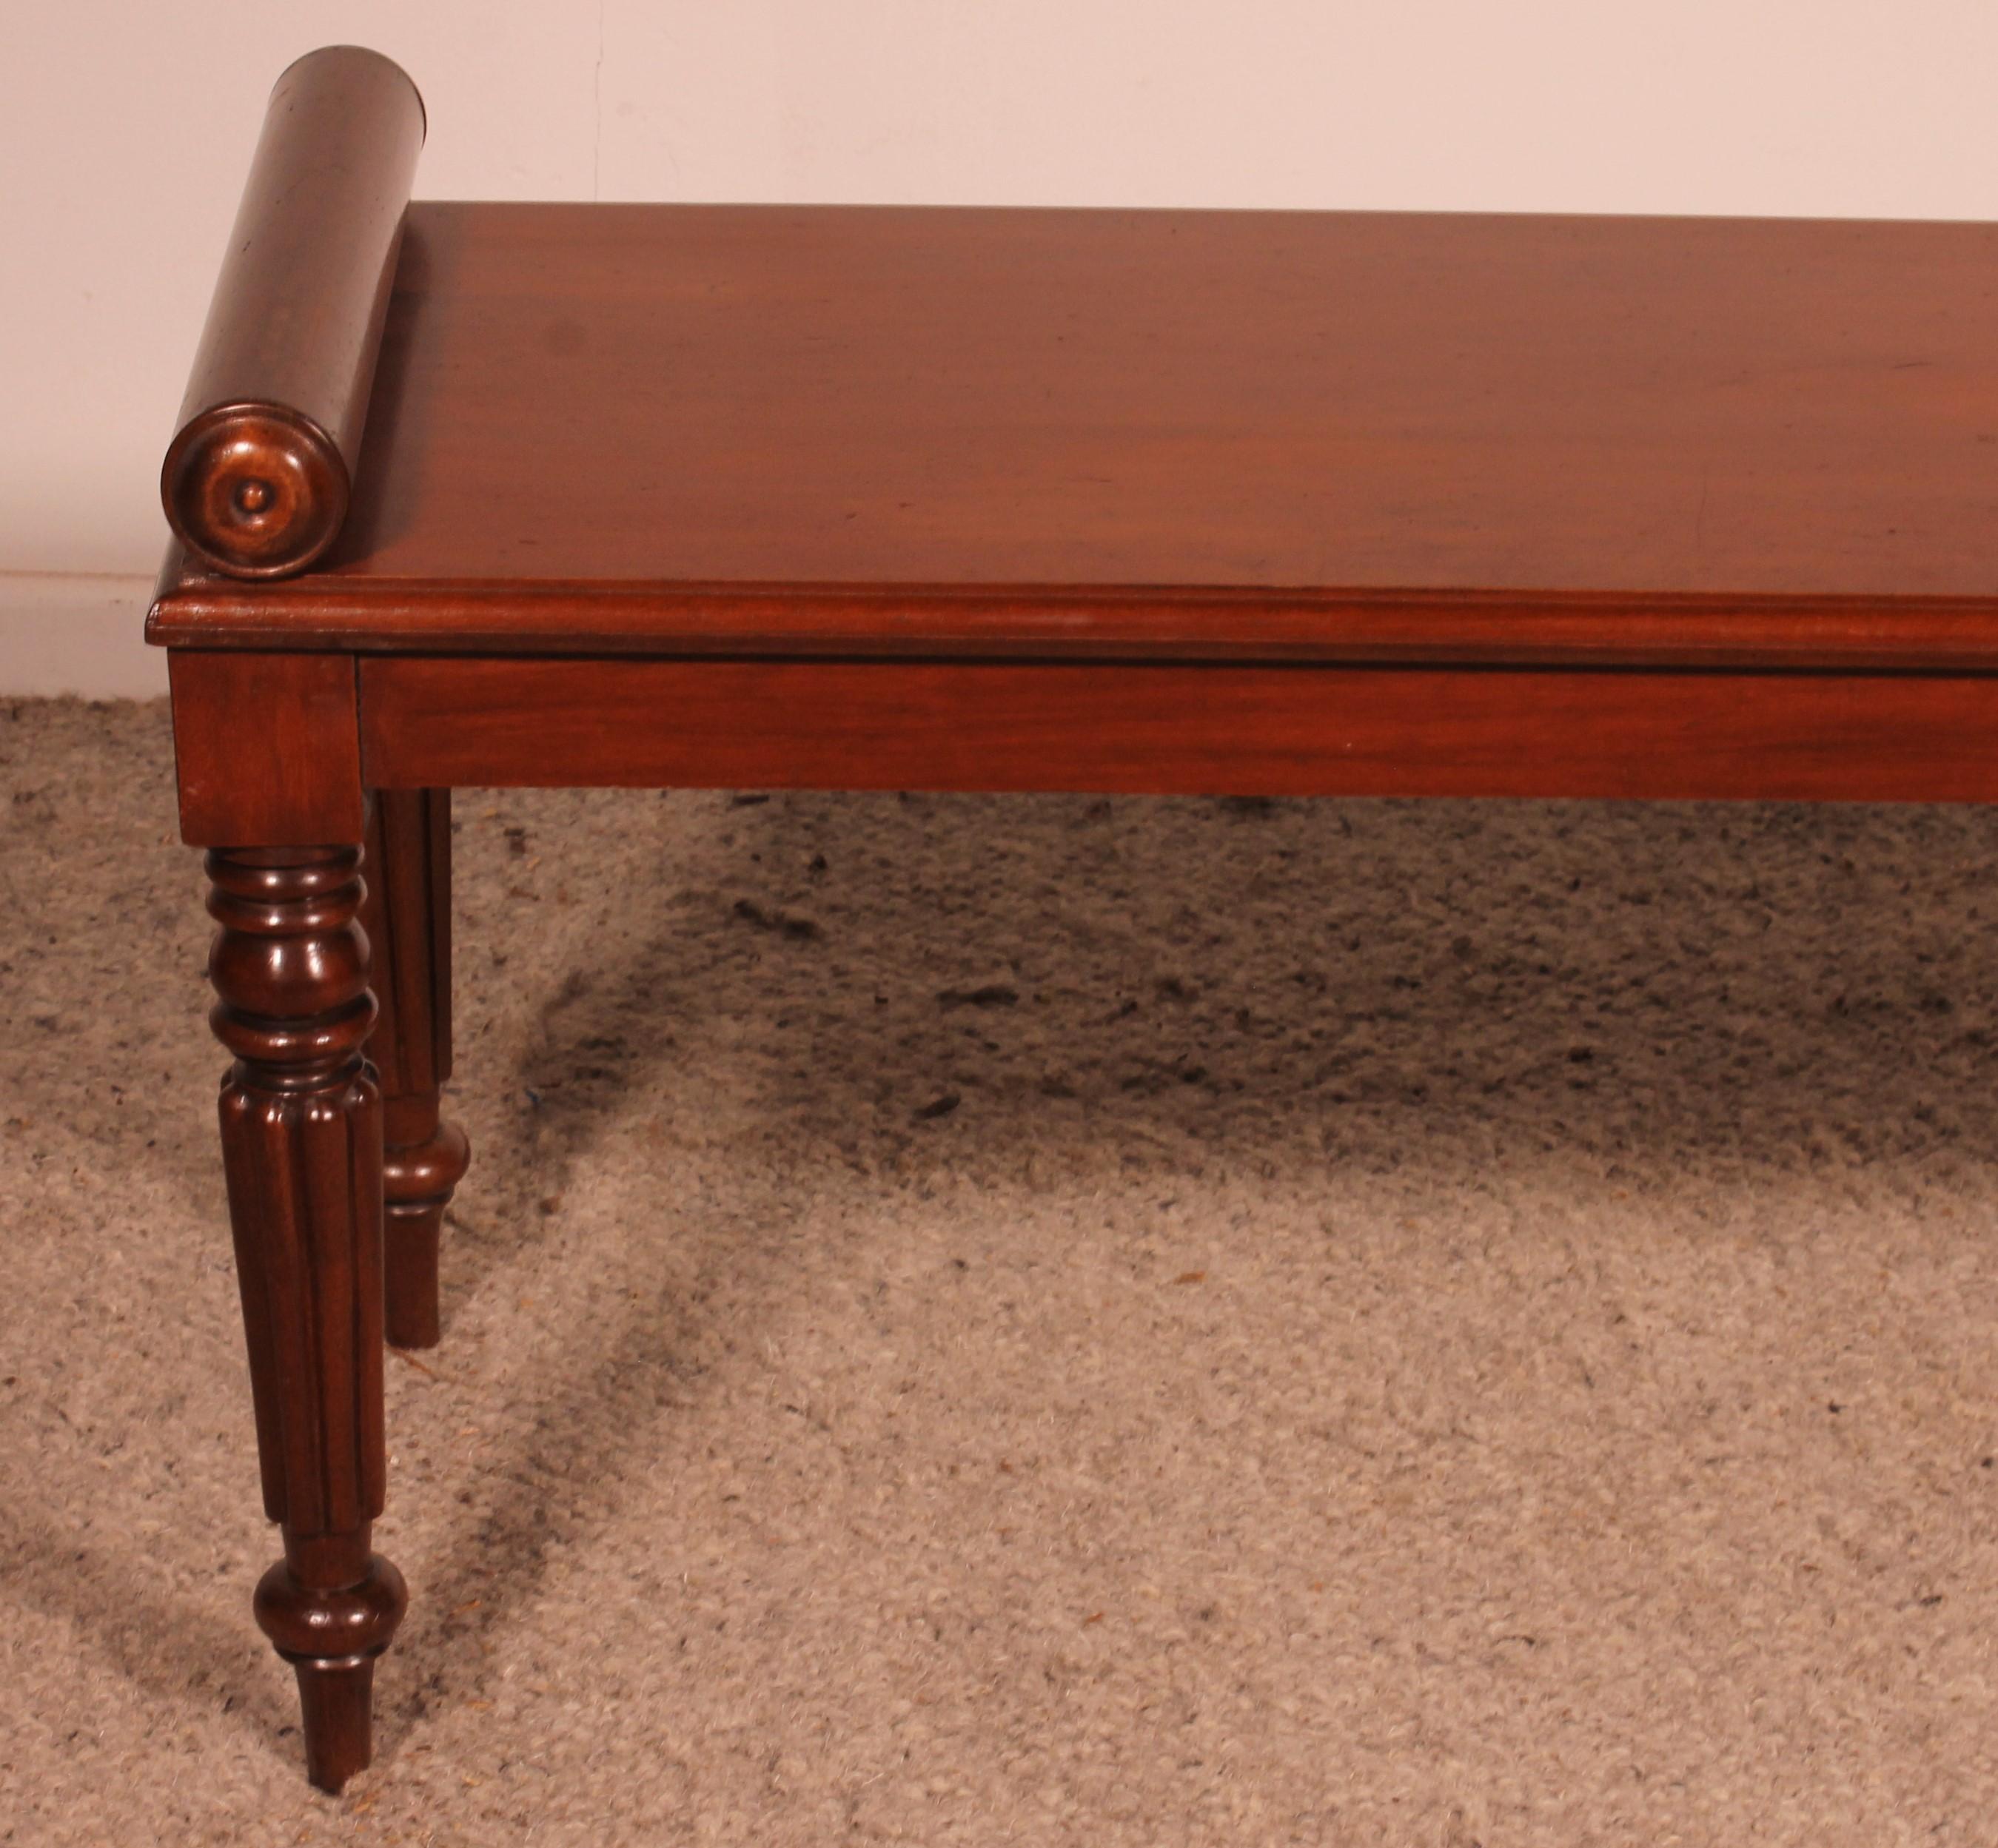 Early Victorian Mahogany Hall Bench From The First Part Of The 19th Century